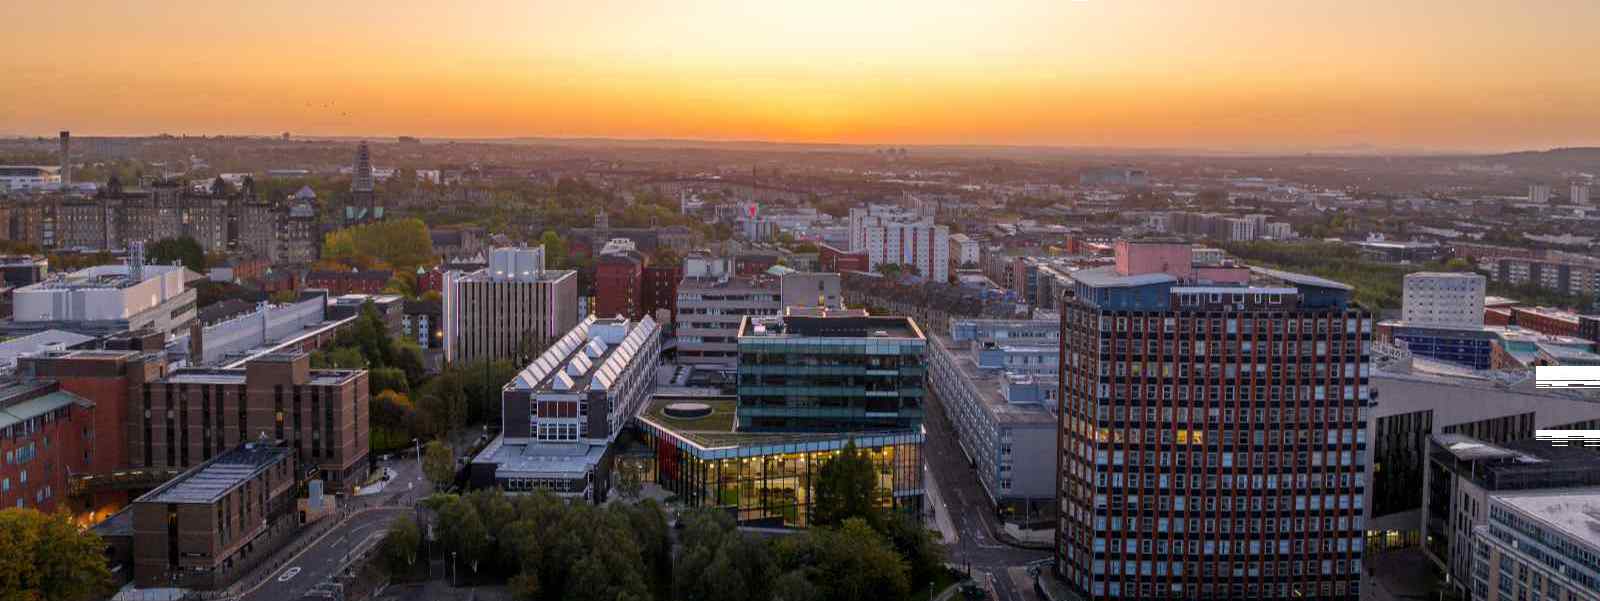 Aerial drone shot of the University of Strathclyde campus